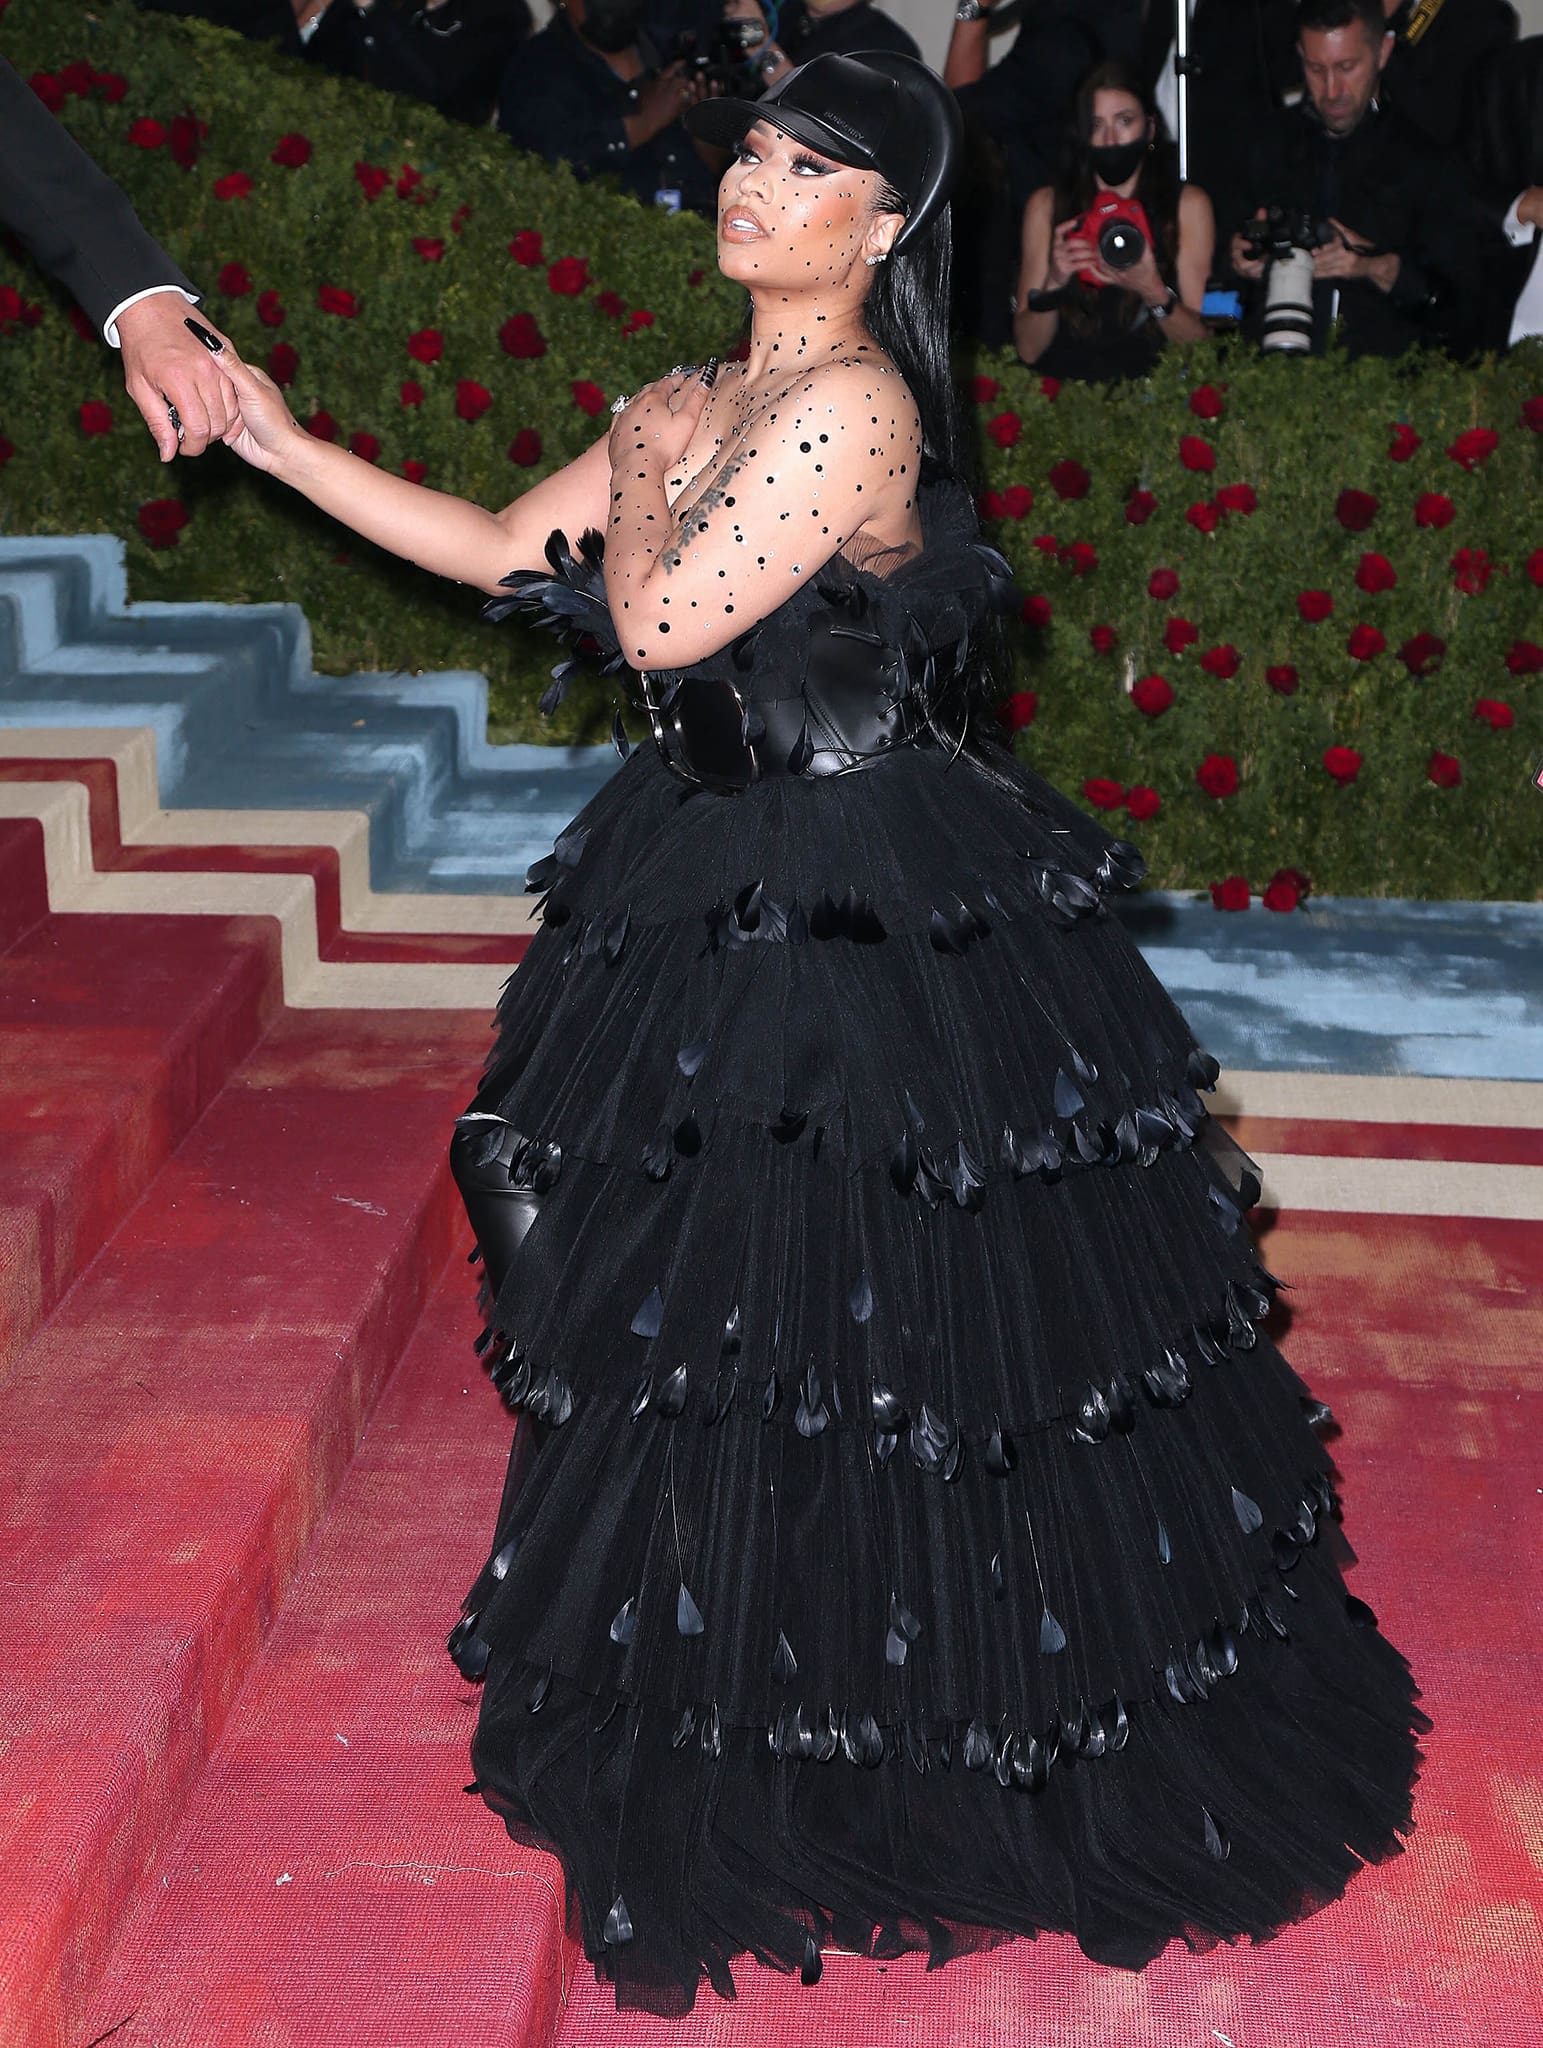 Nicki Minaj narrowly avoids a wardrobe malfunction as Burberry made the cup size of her outfit a little small